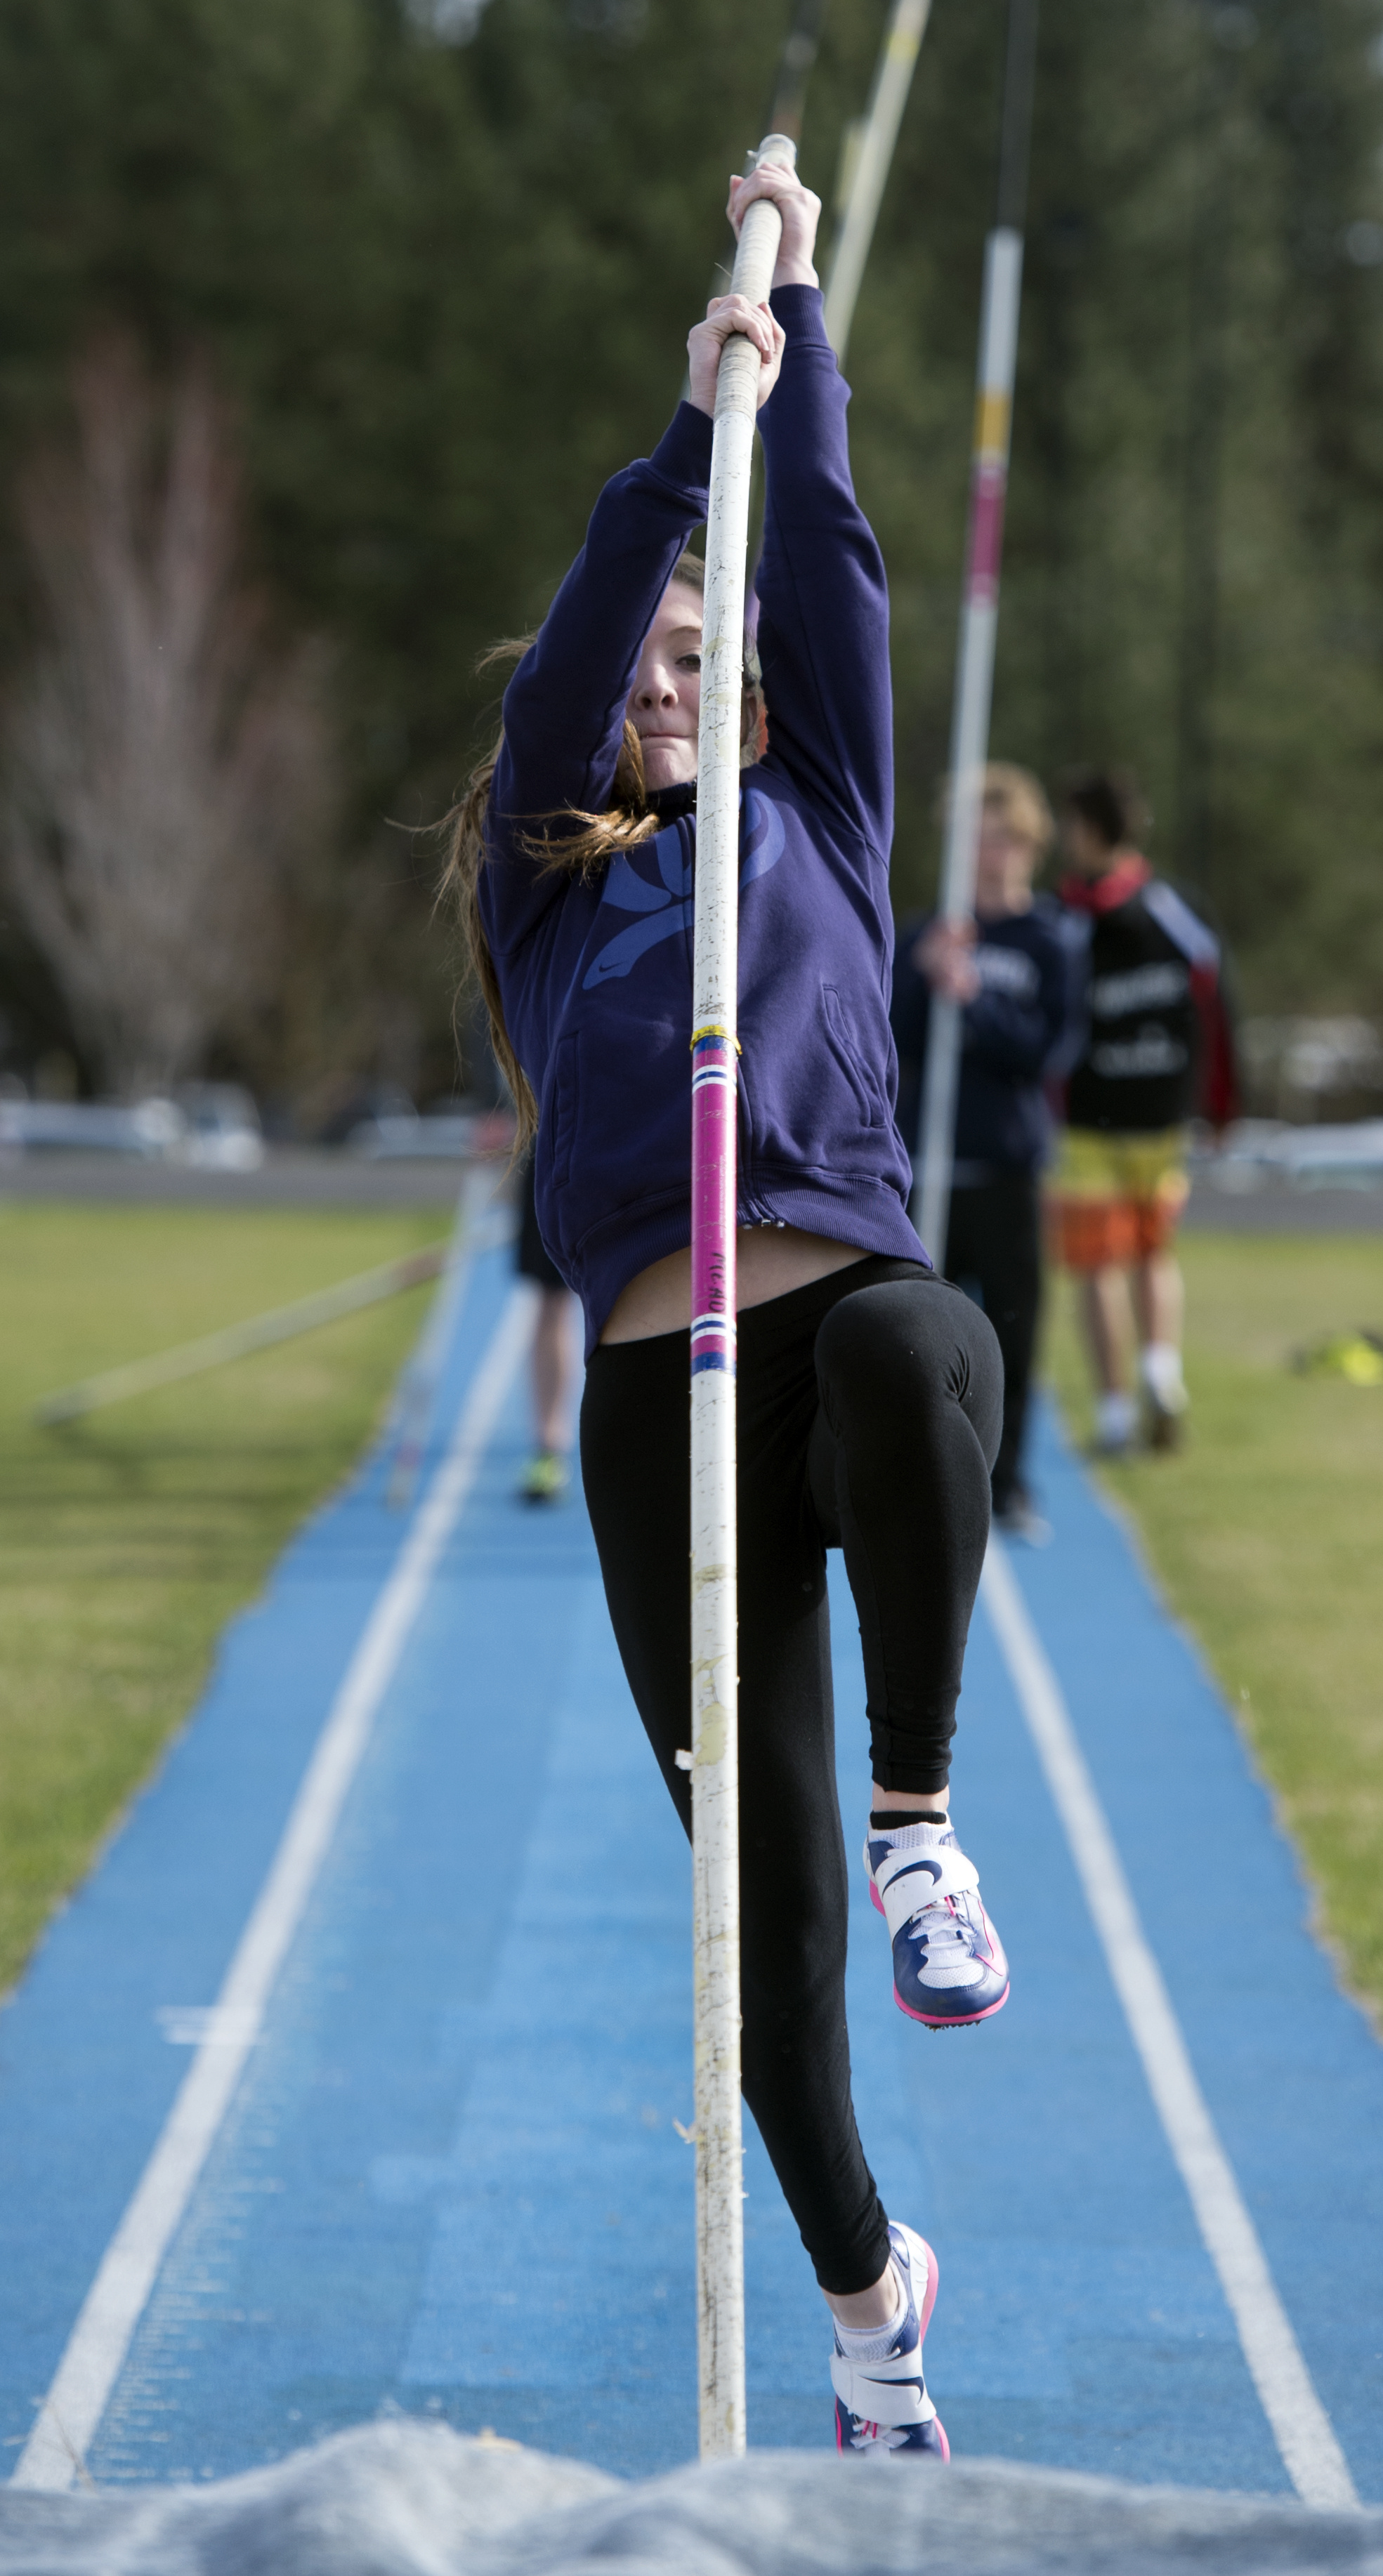 Carrie Jacka Close To Meads Girls Pole Vault Record The Spokesman Review